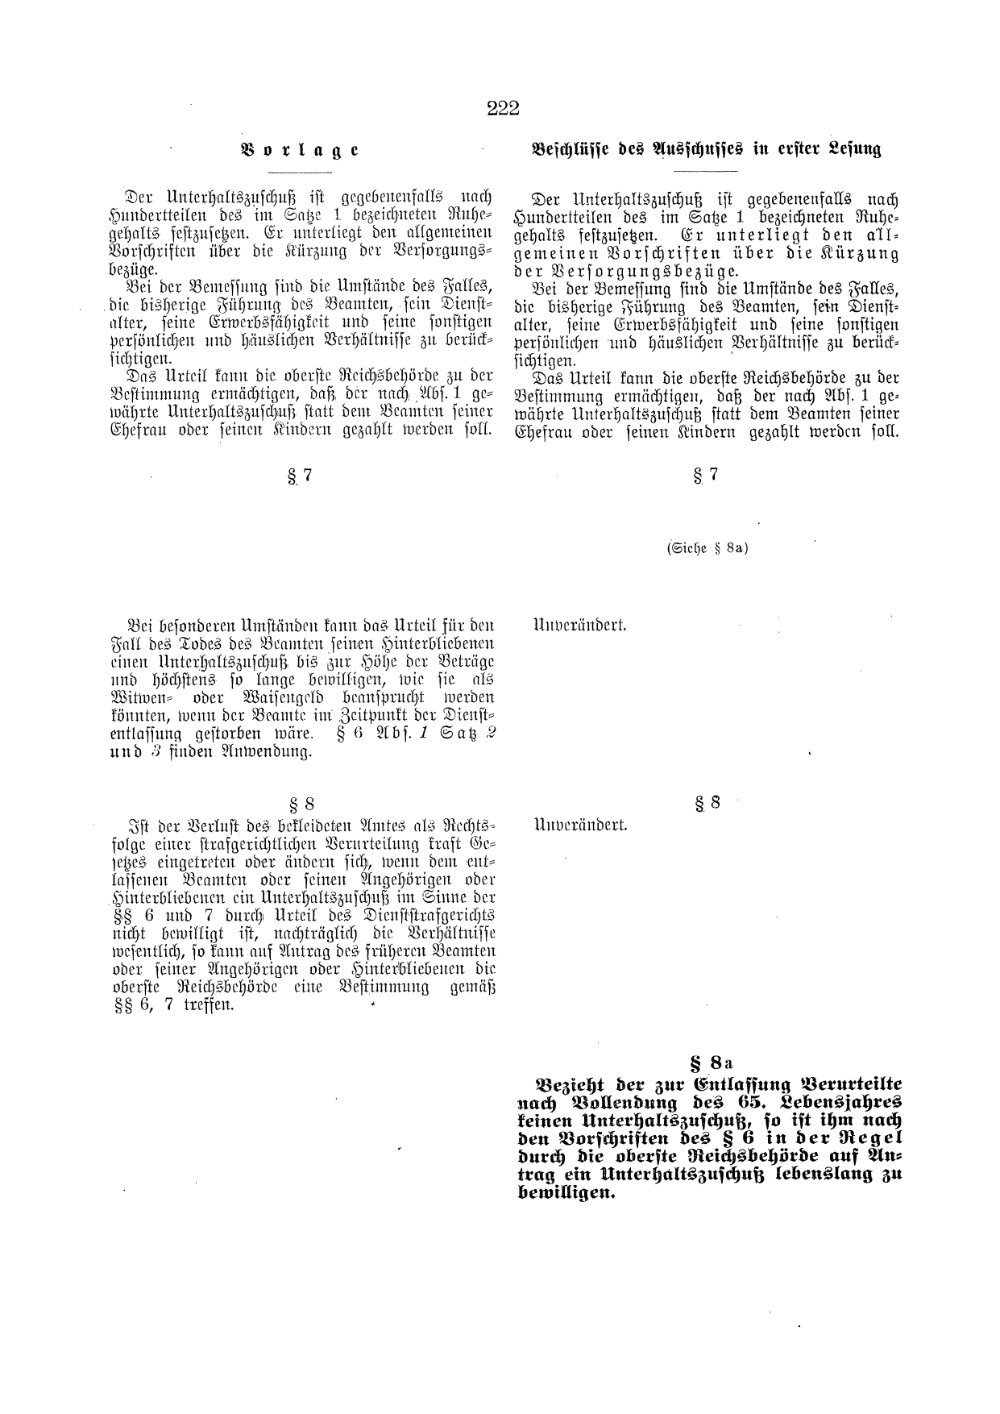 Scan of page 222